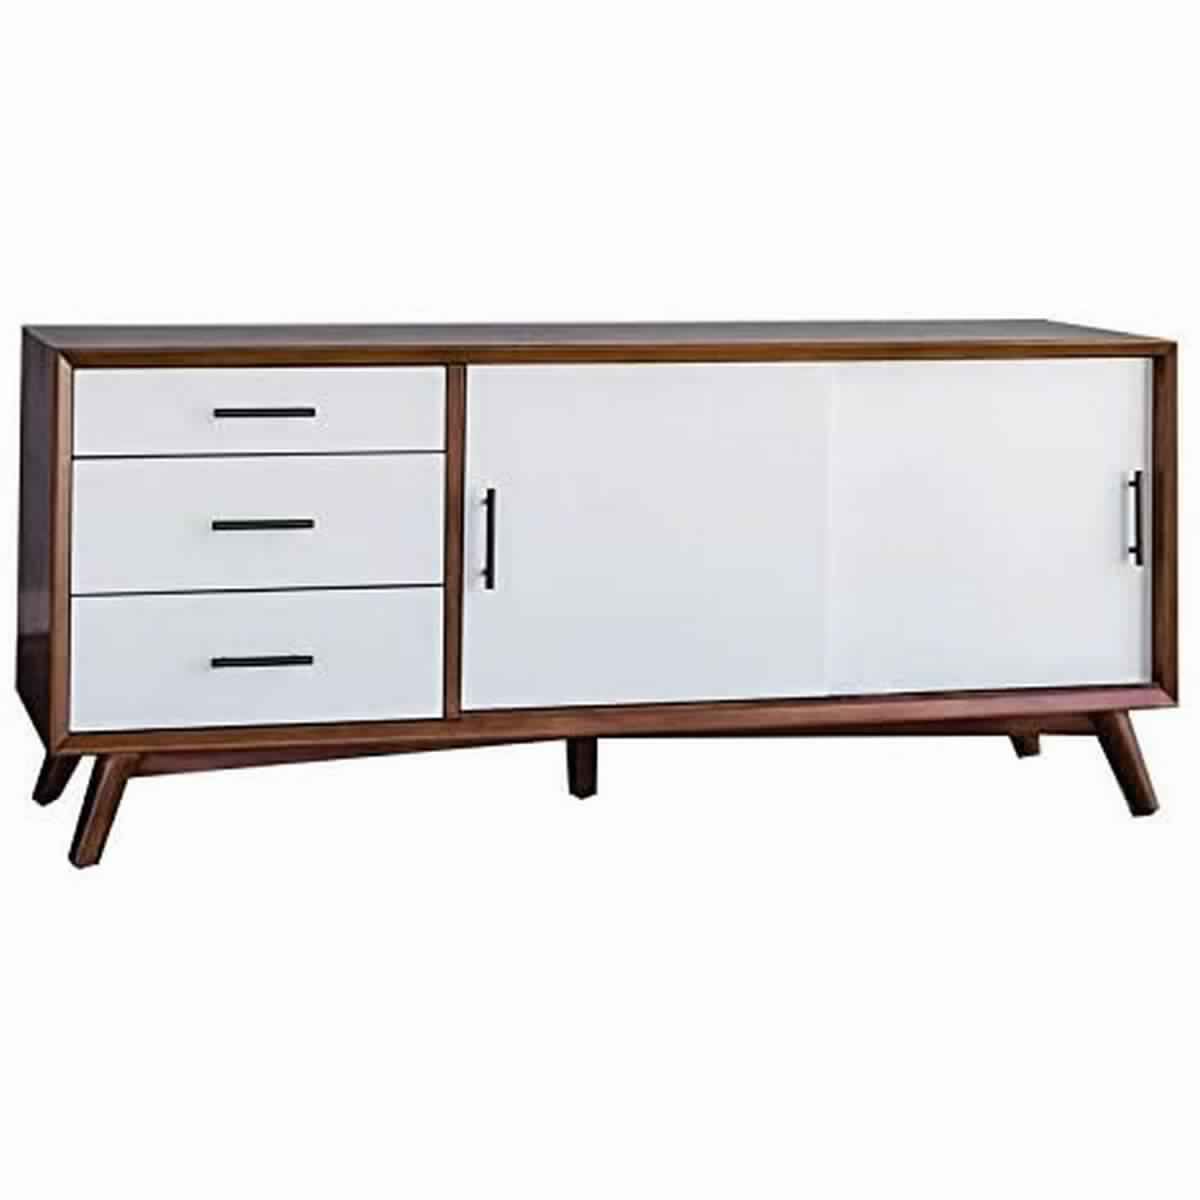 Wooden TV Console with 3 Drawers and 2 Rolling Doors, Brown and White